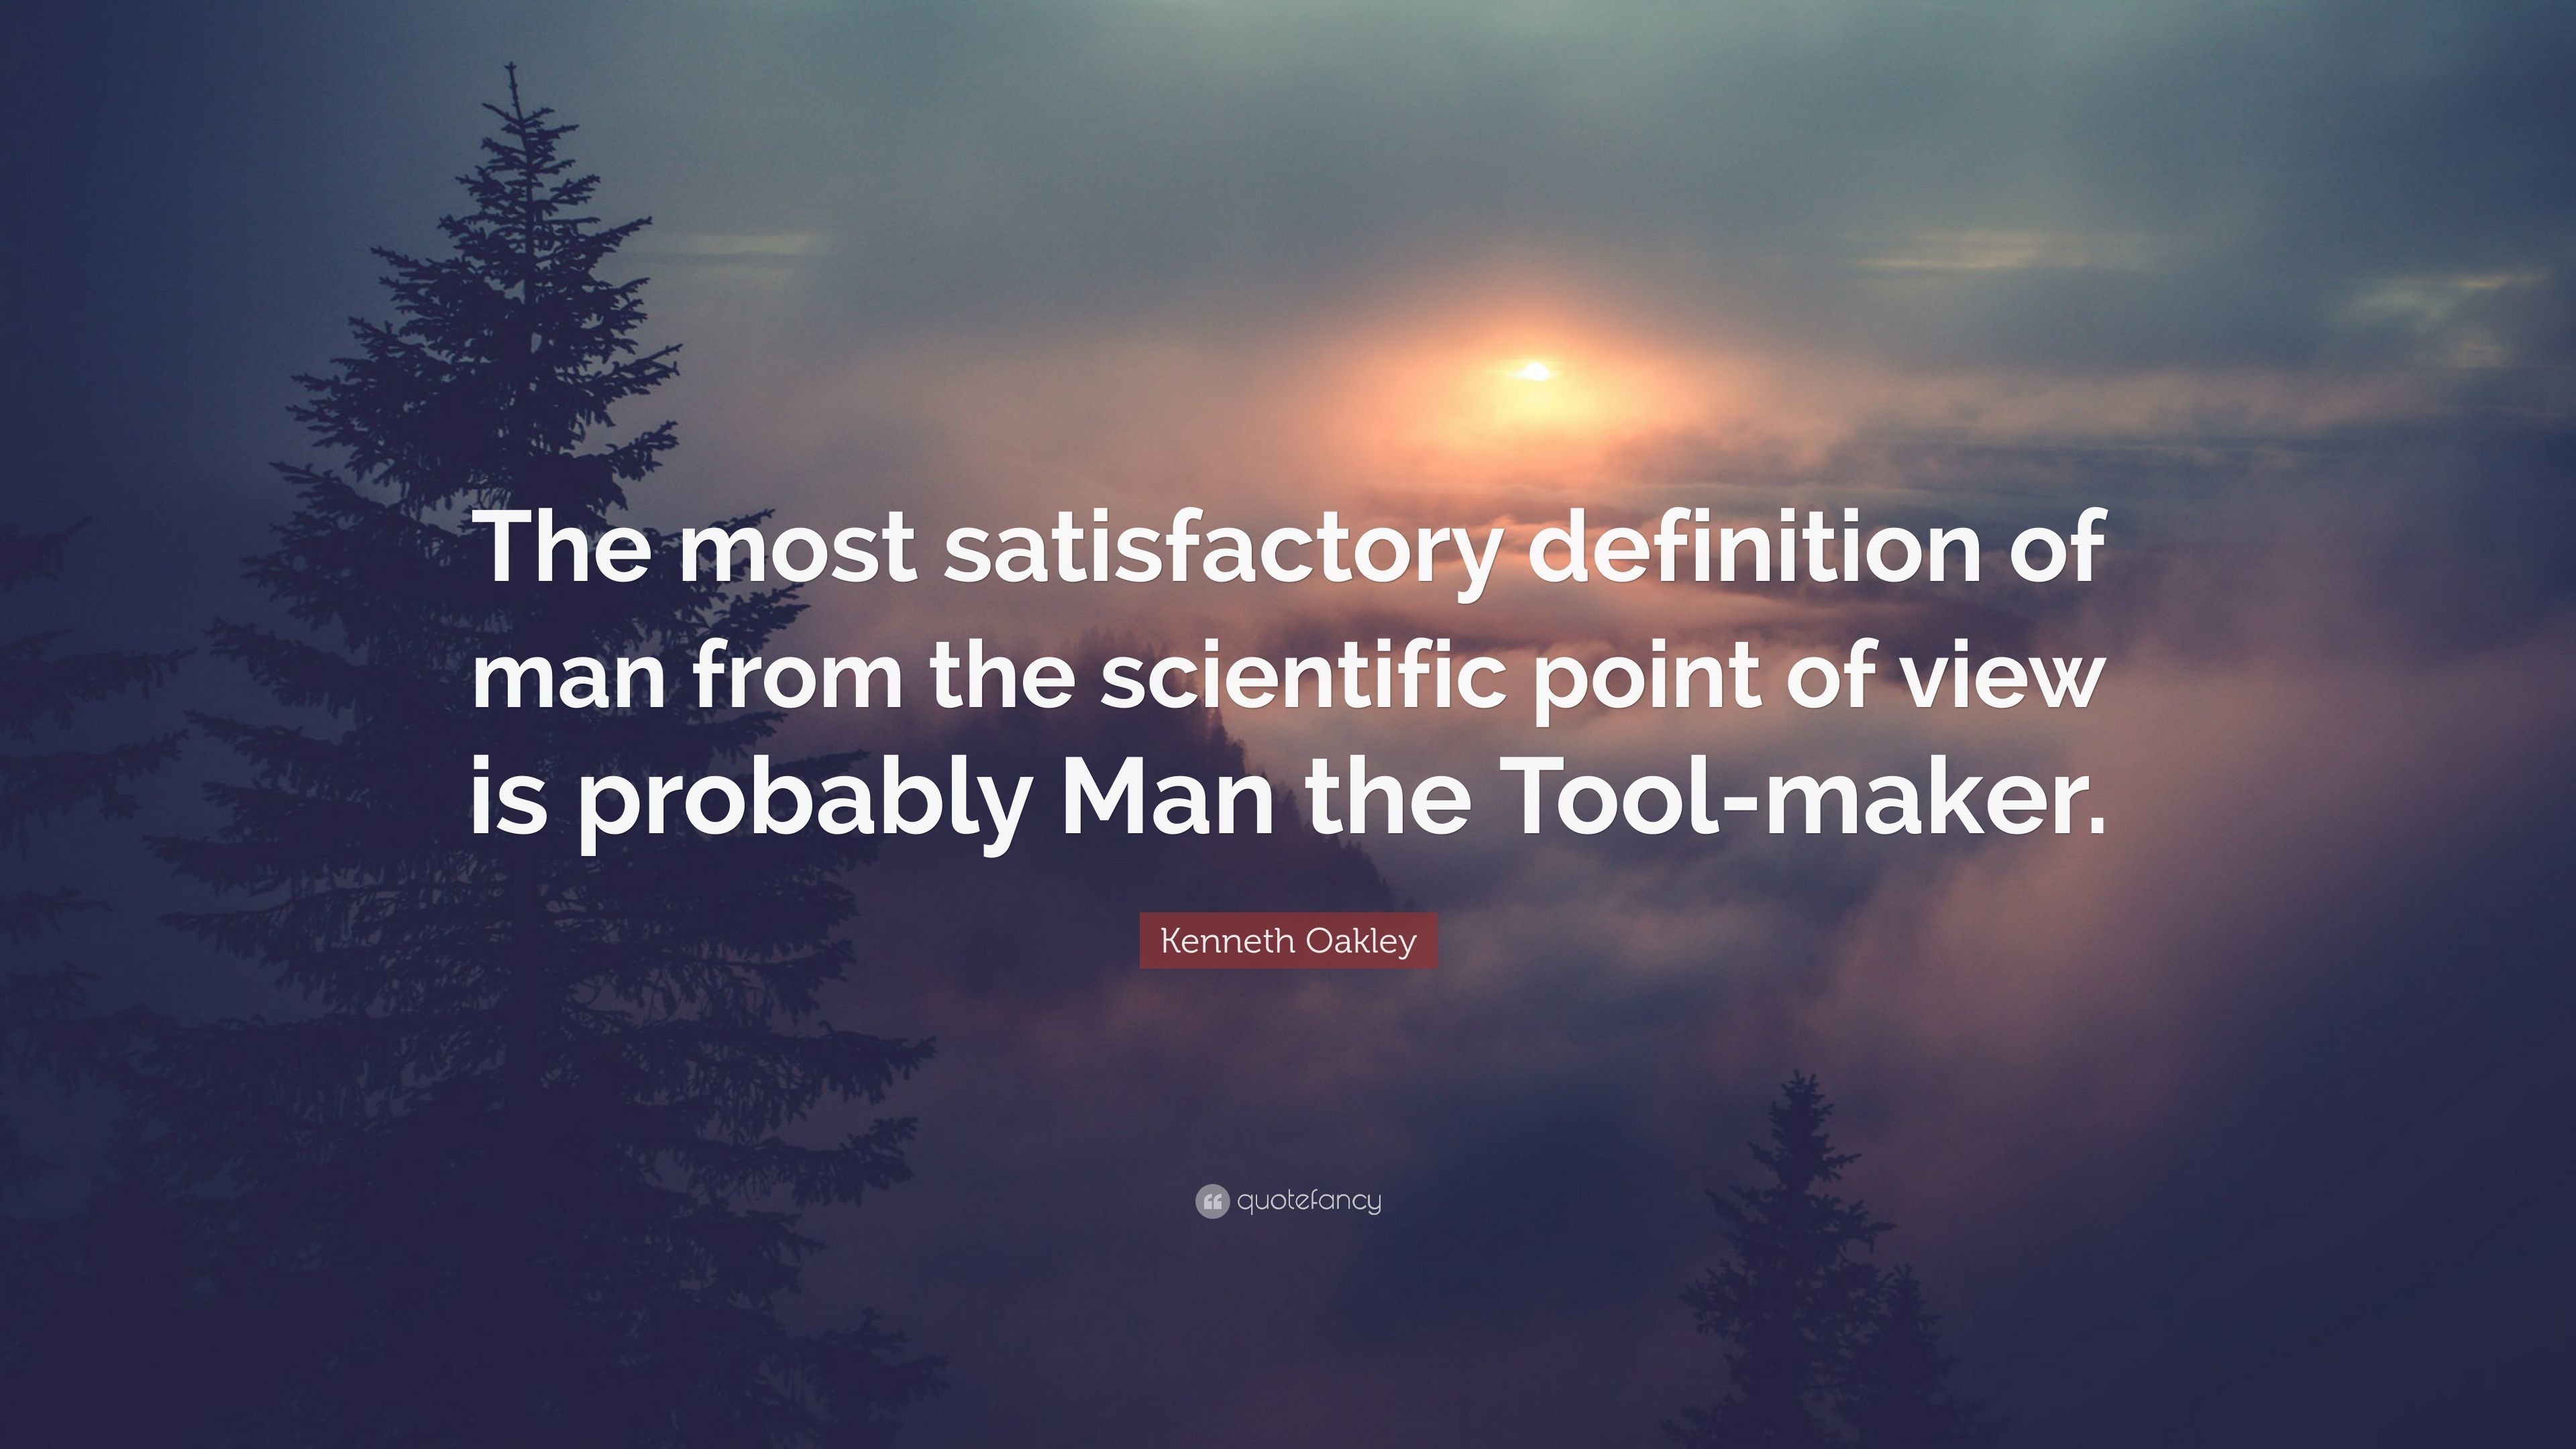 3840x2160 Kenneth Oakley Quote: “The most satisfactory definition of man from the  scientific point of